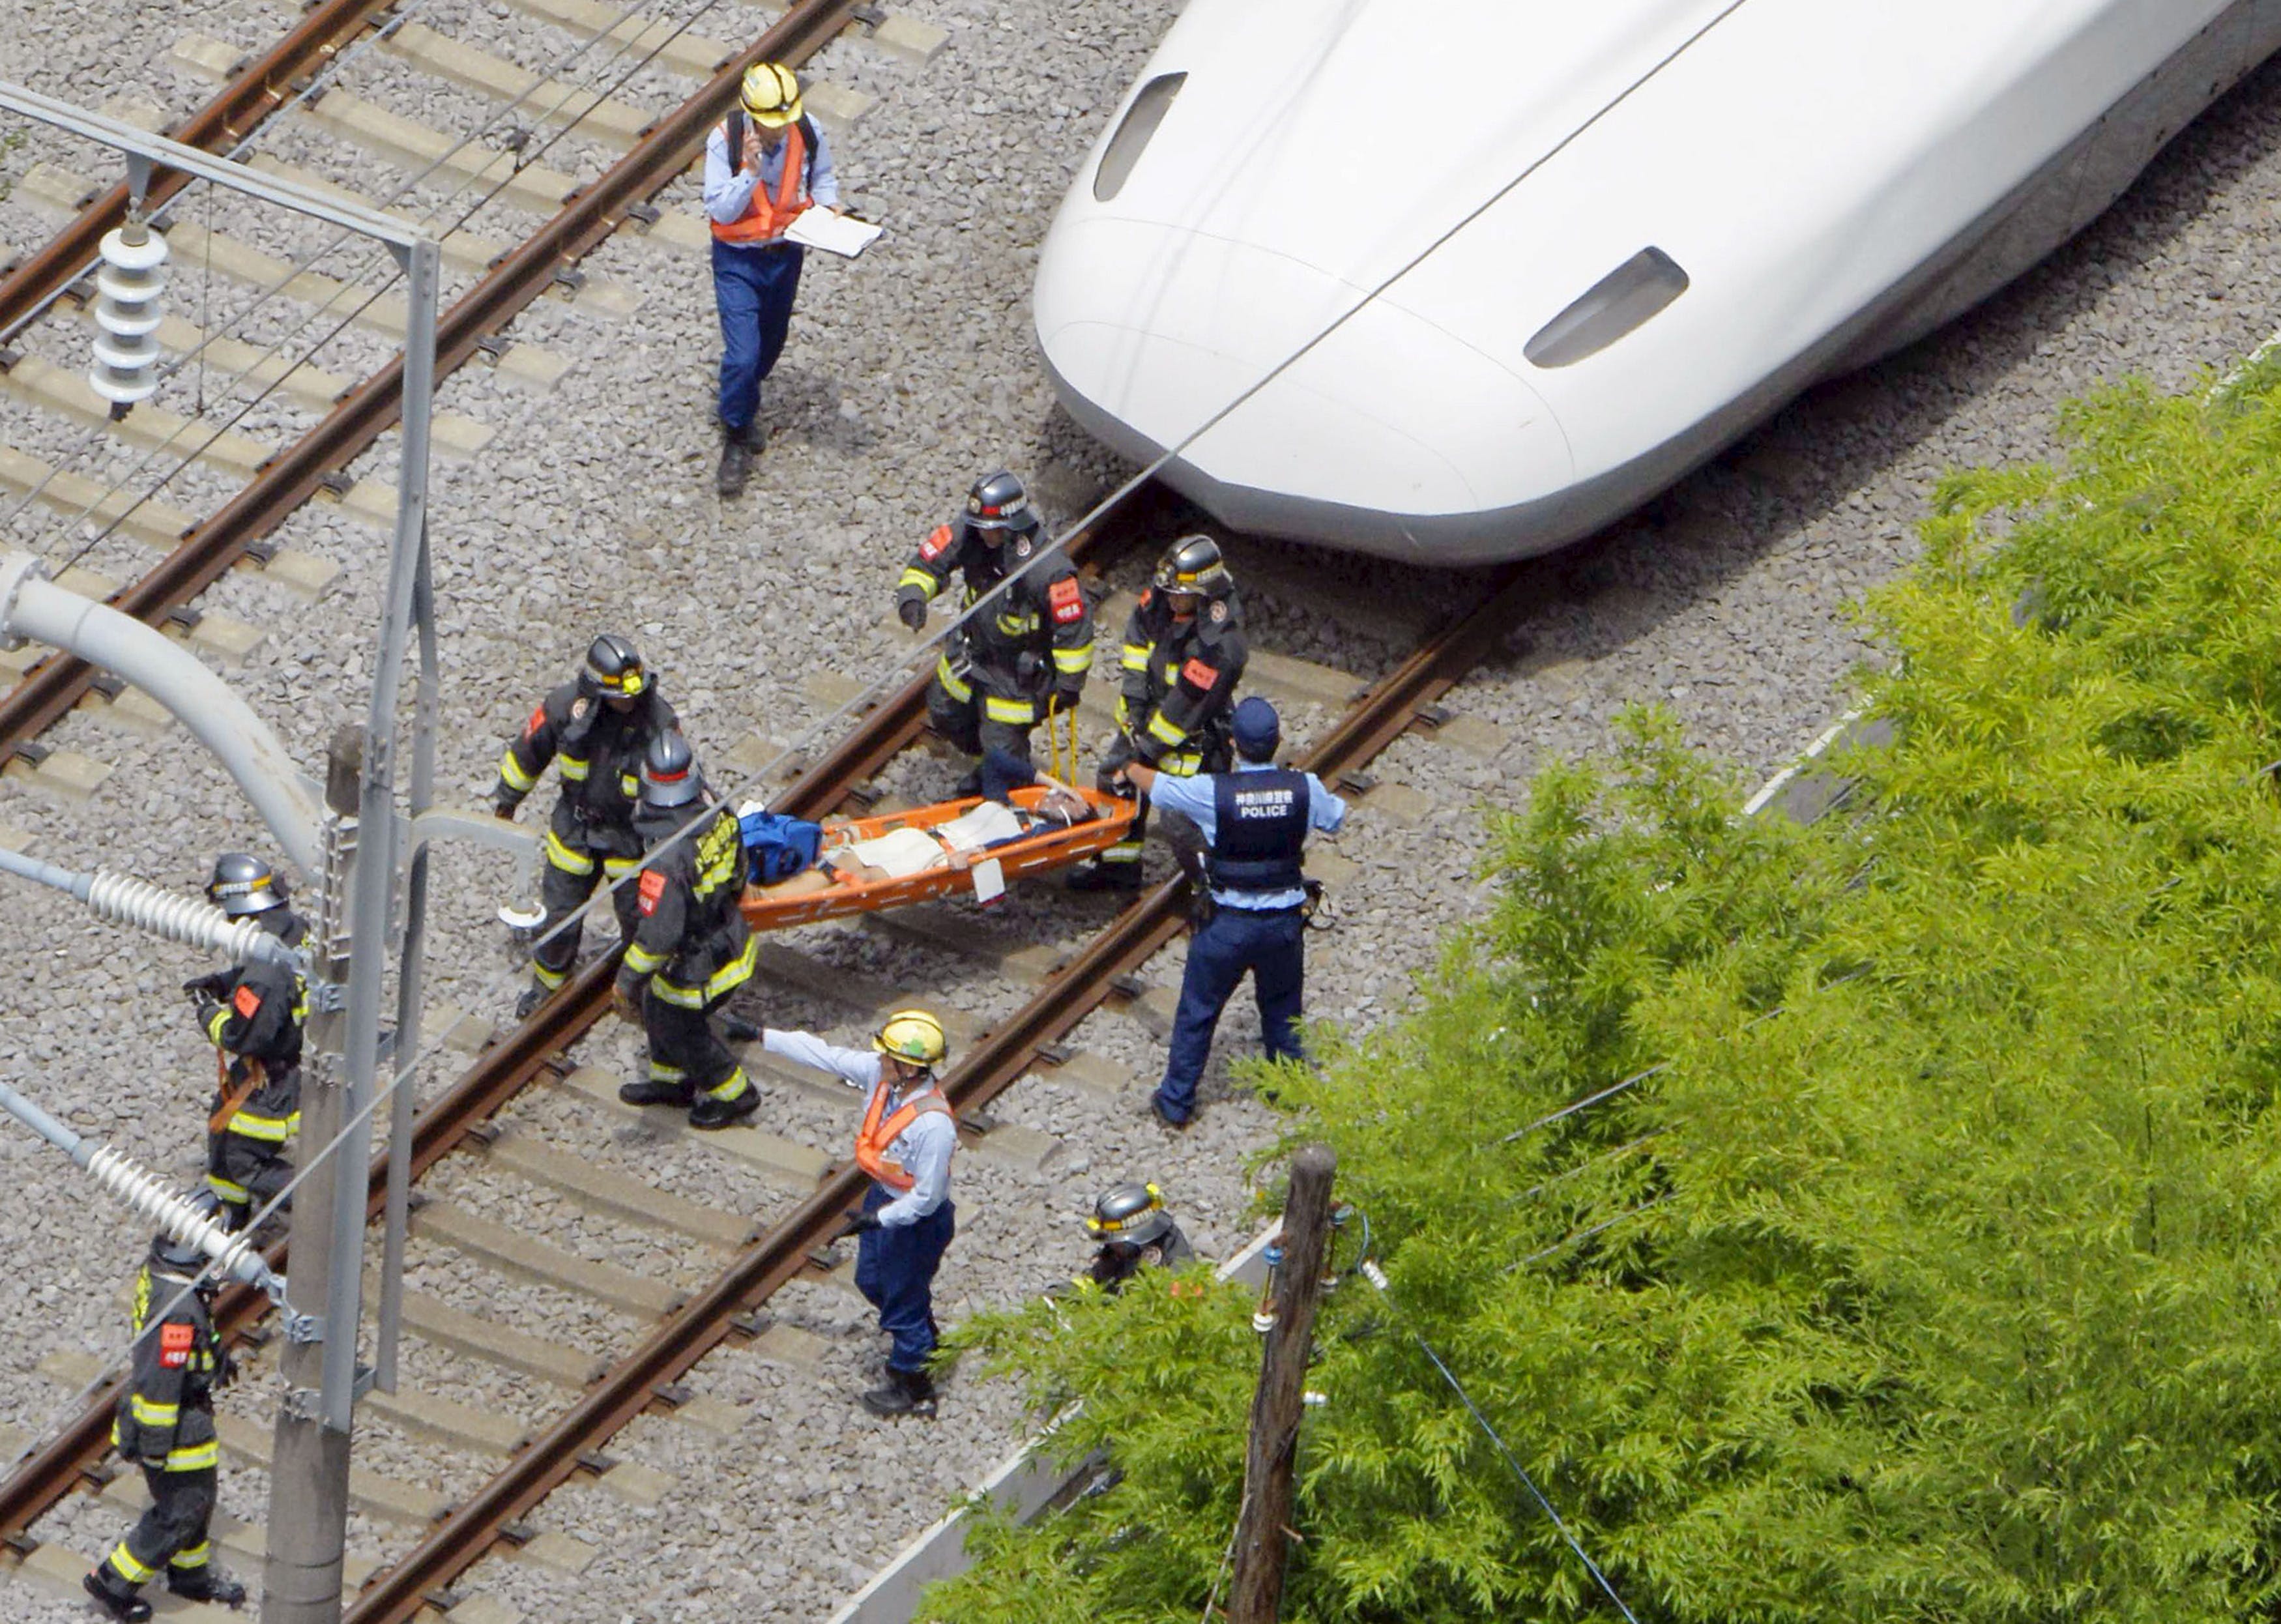 A passenger on the stretcher is carried by rescue workers from a Shinkansen bullet train after it made an emergency stop in Odawara